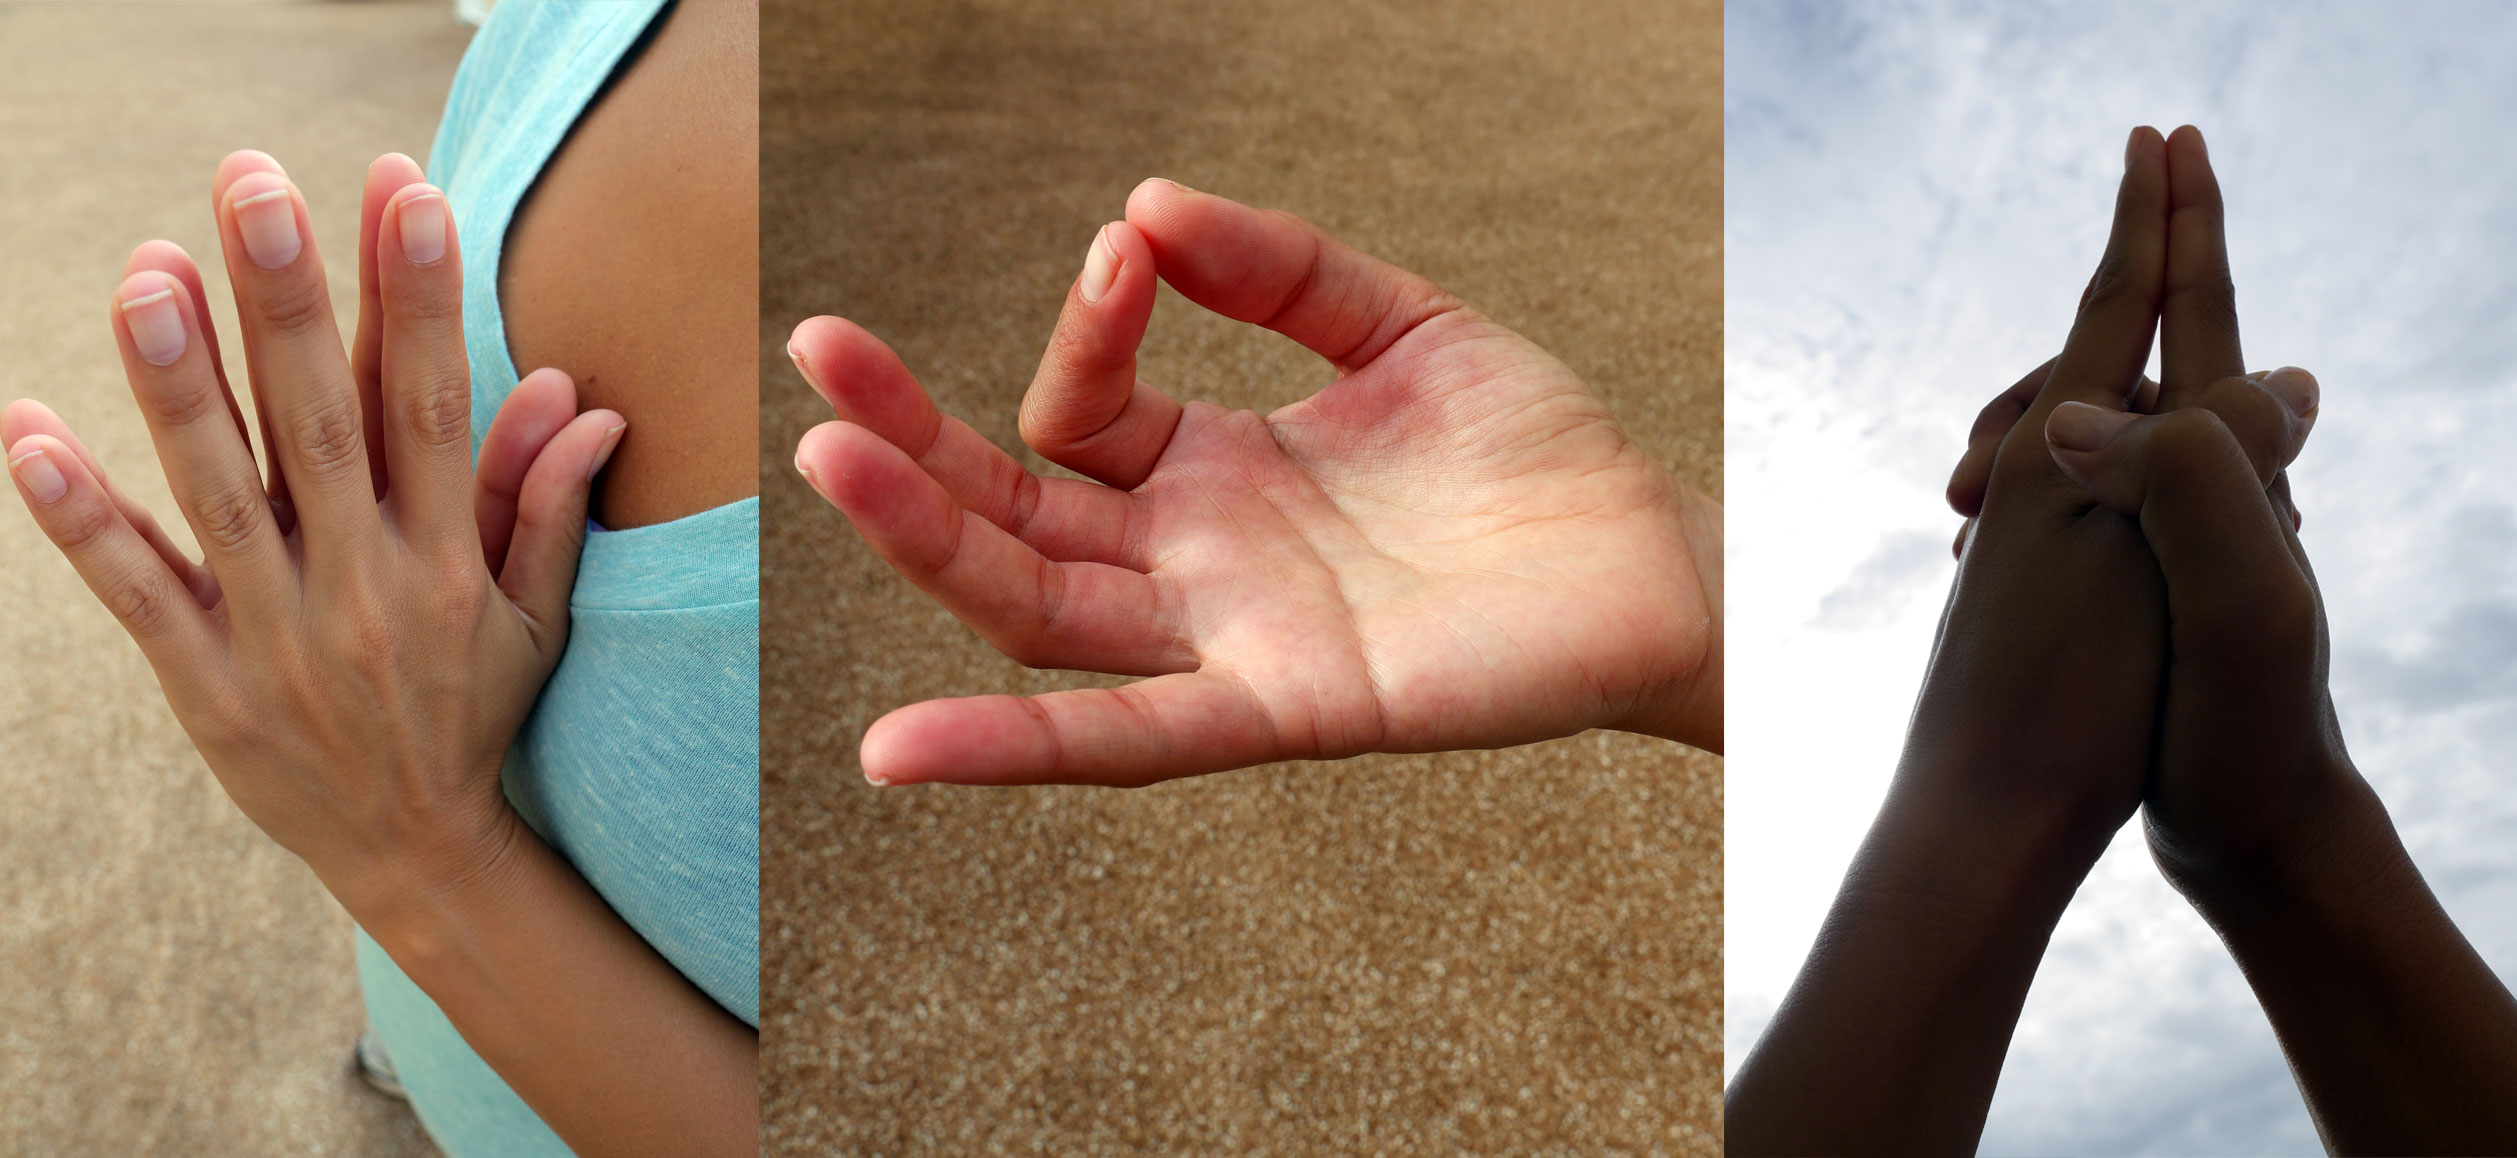 What’s up with Yoga Hands?